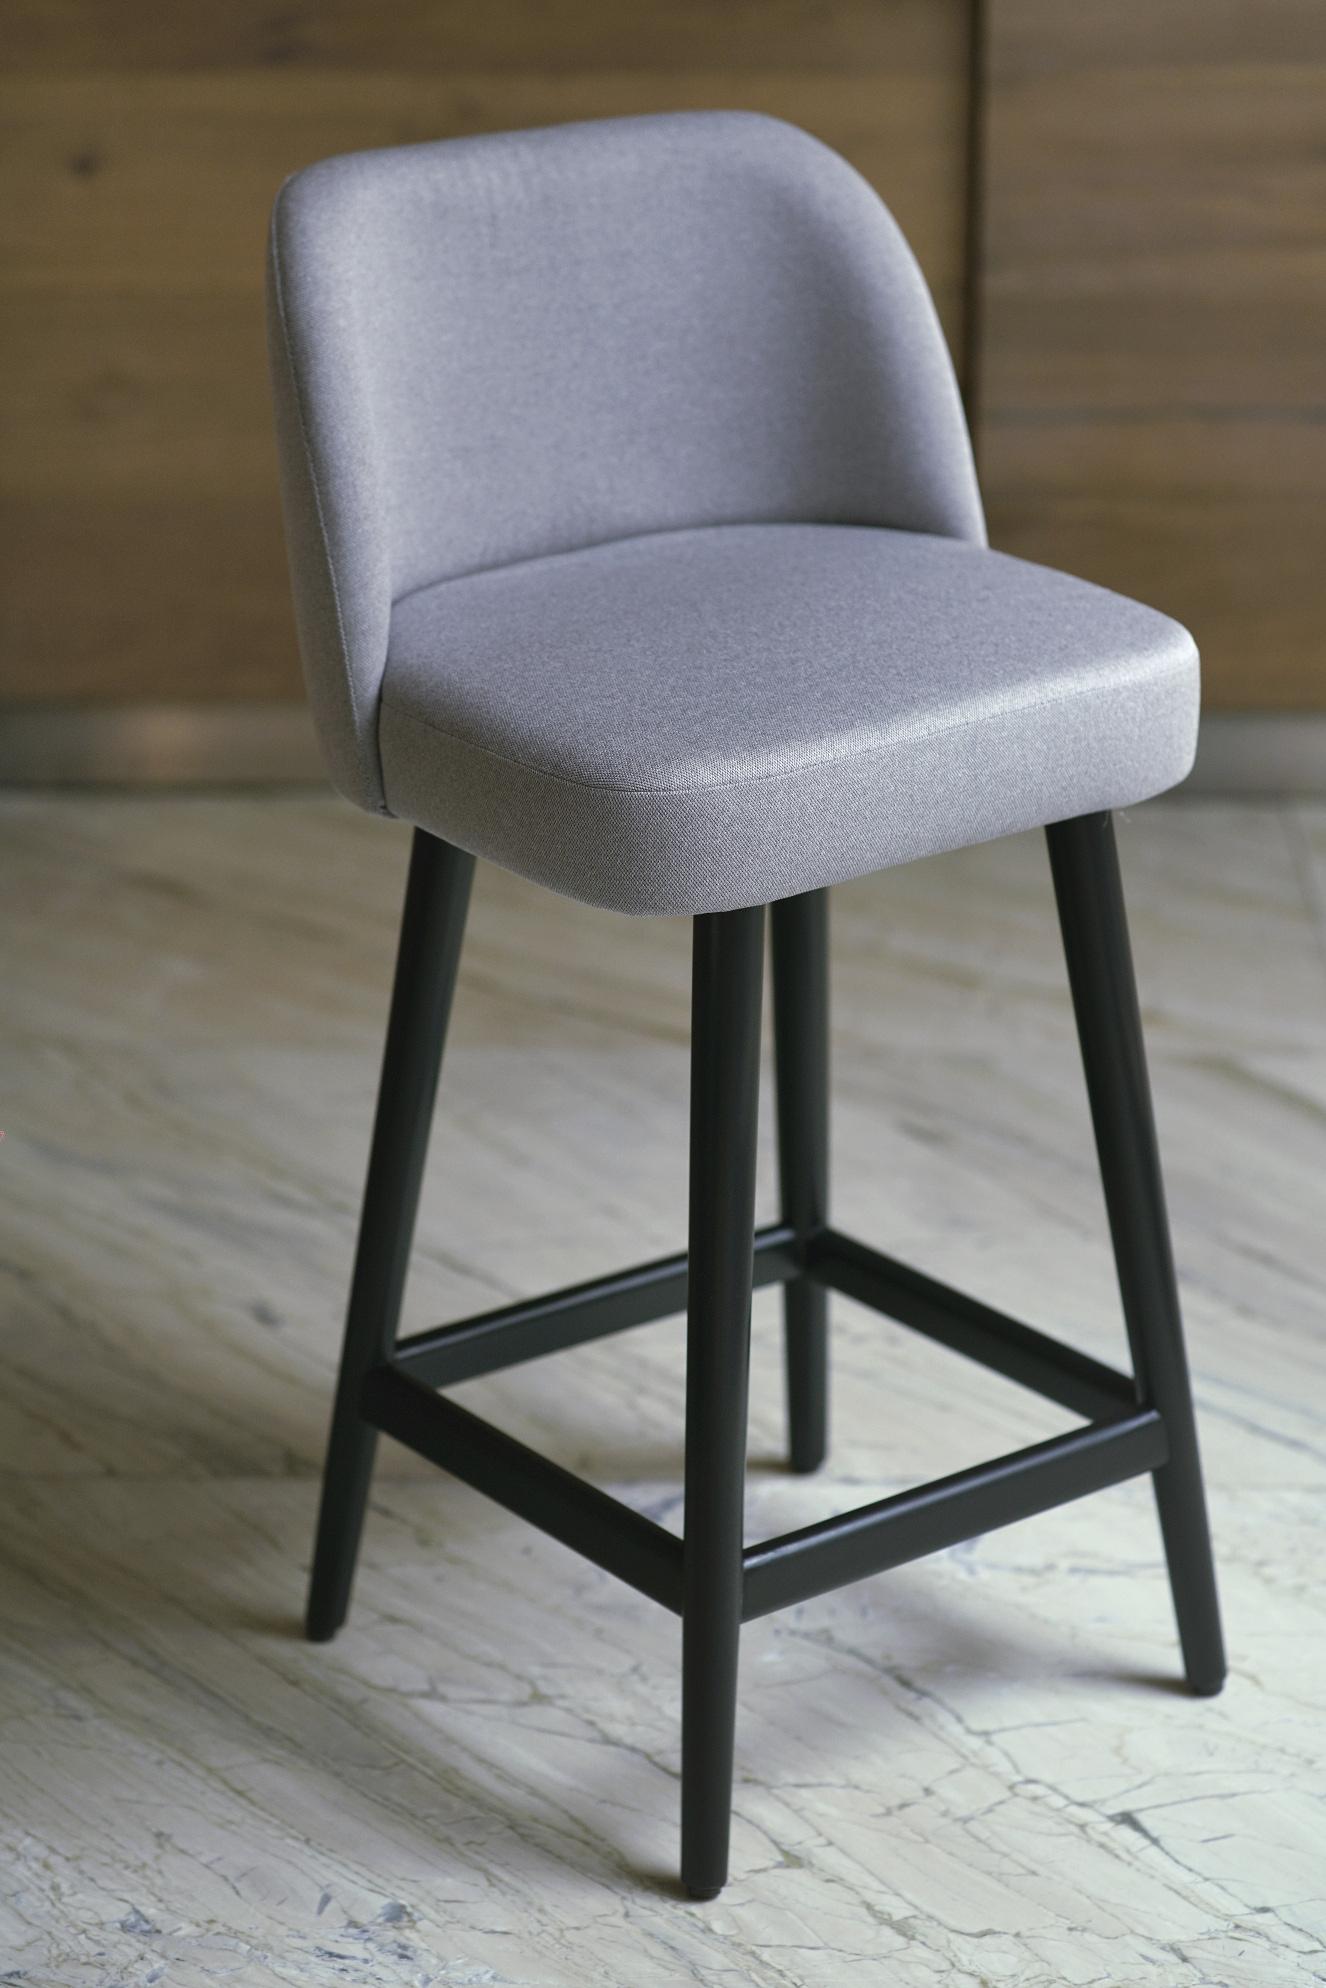 Helsinki collection. Helsinki counter stool: simple, elegant, comfortable. Available in oak and walnut base or in custom materials, may be upholstered with variety of fabrics and colors. Also available as a chair and arm chair. 

Our clients´